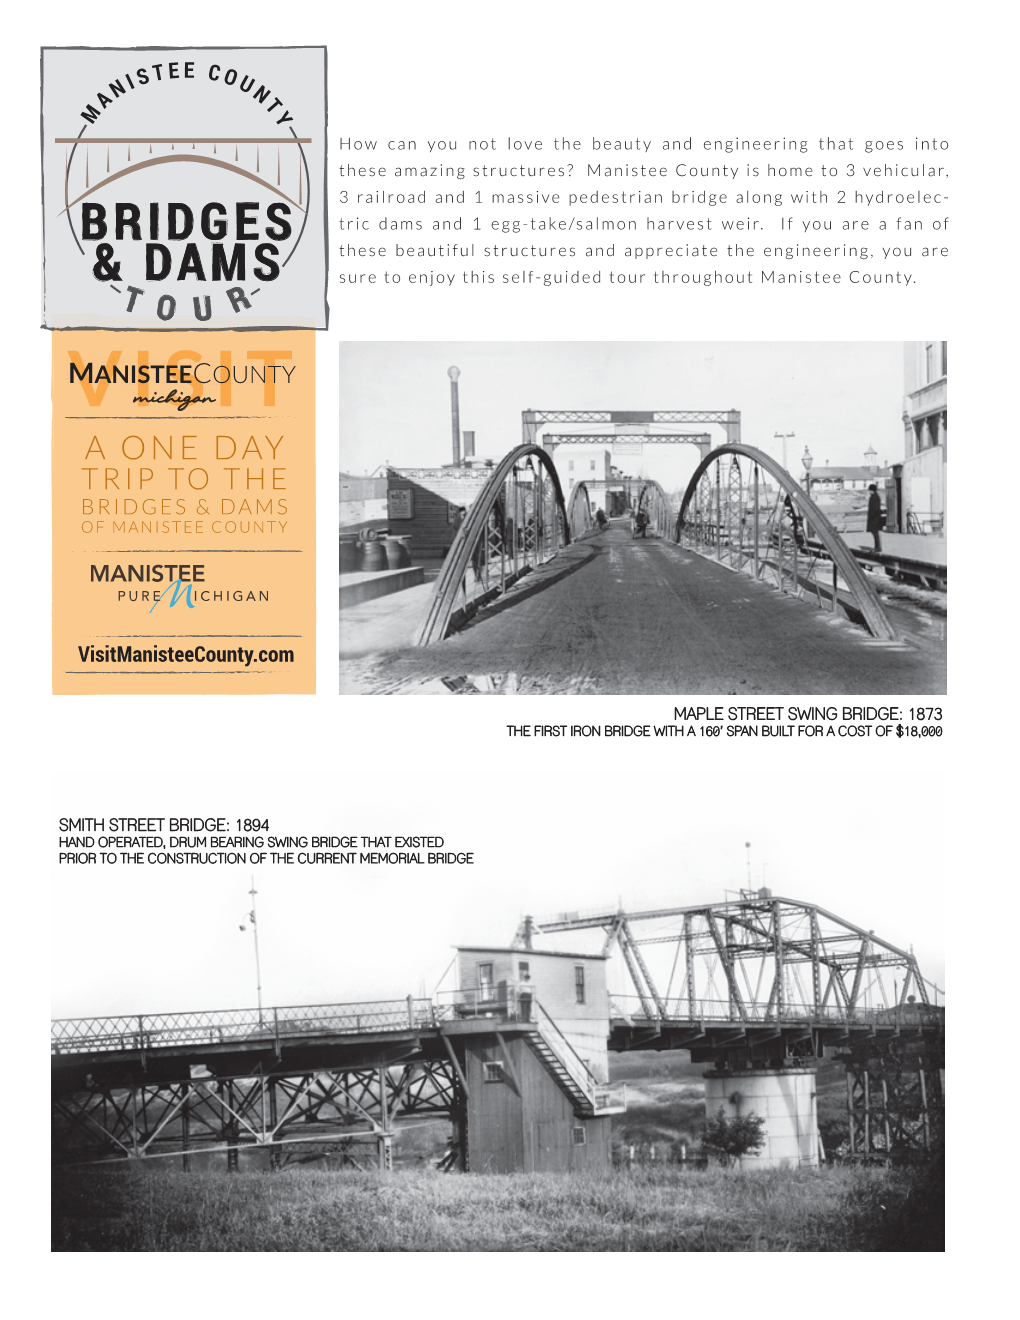 Bridges and Dams Tour in the Heart of Downtown Manistee at the Swing Bridge - Which Can Be Viewed from the Second Location on the Memorial Railroad Crossing